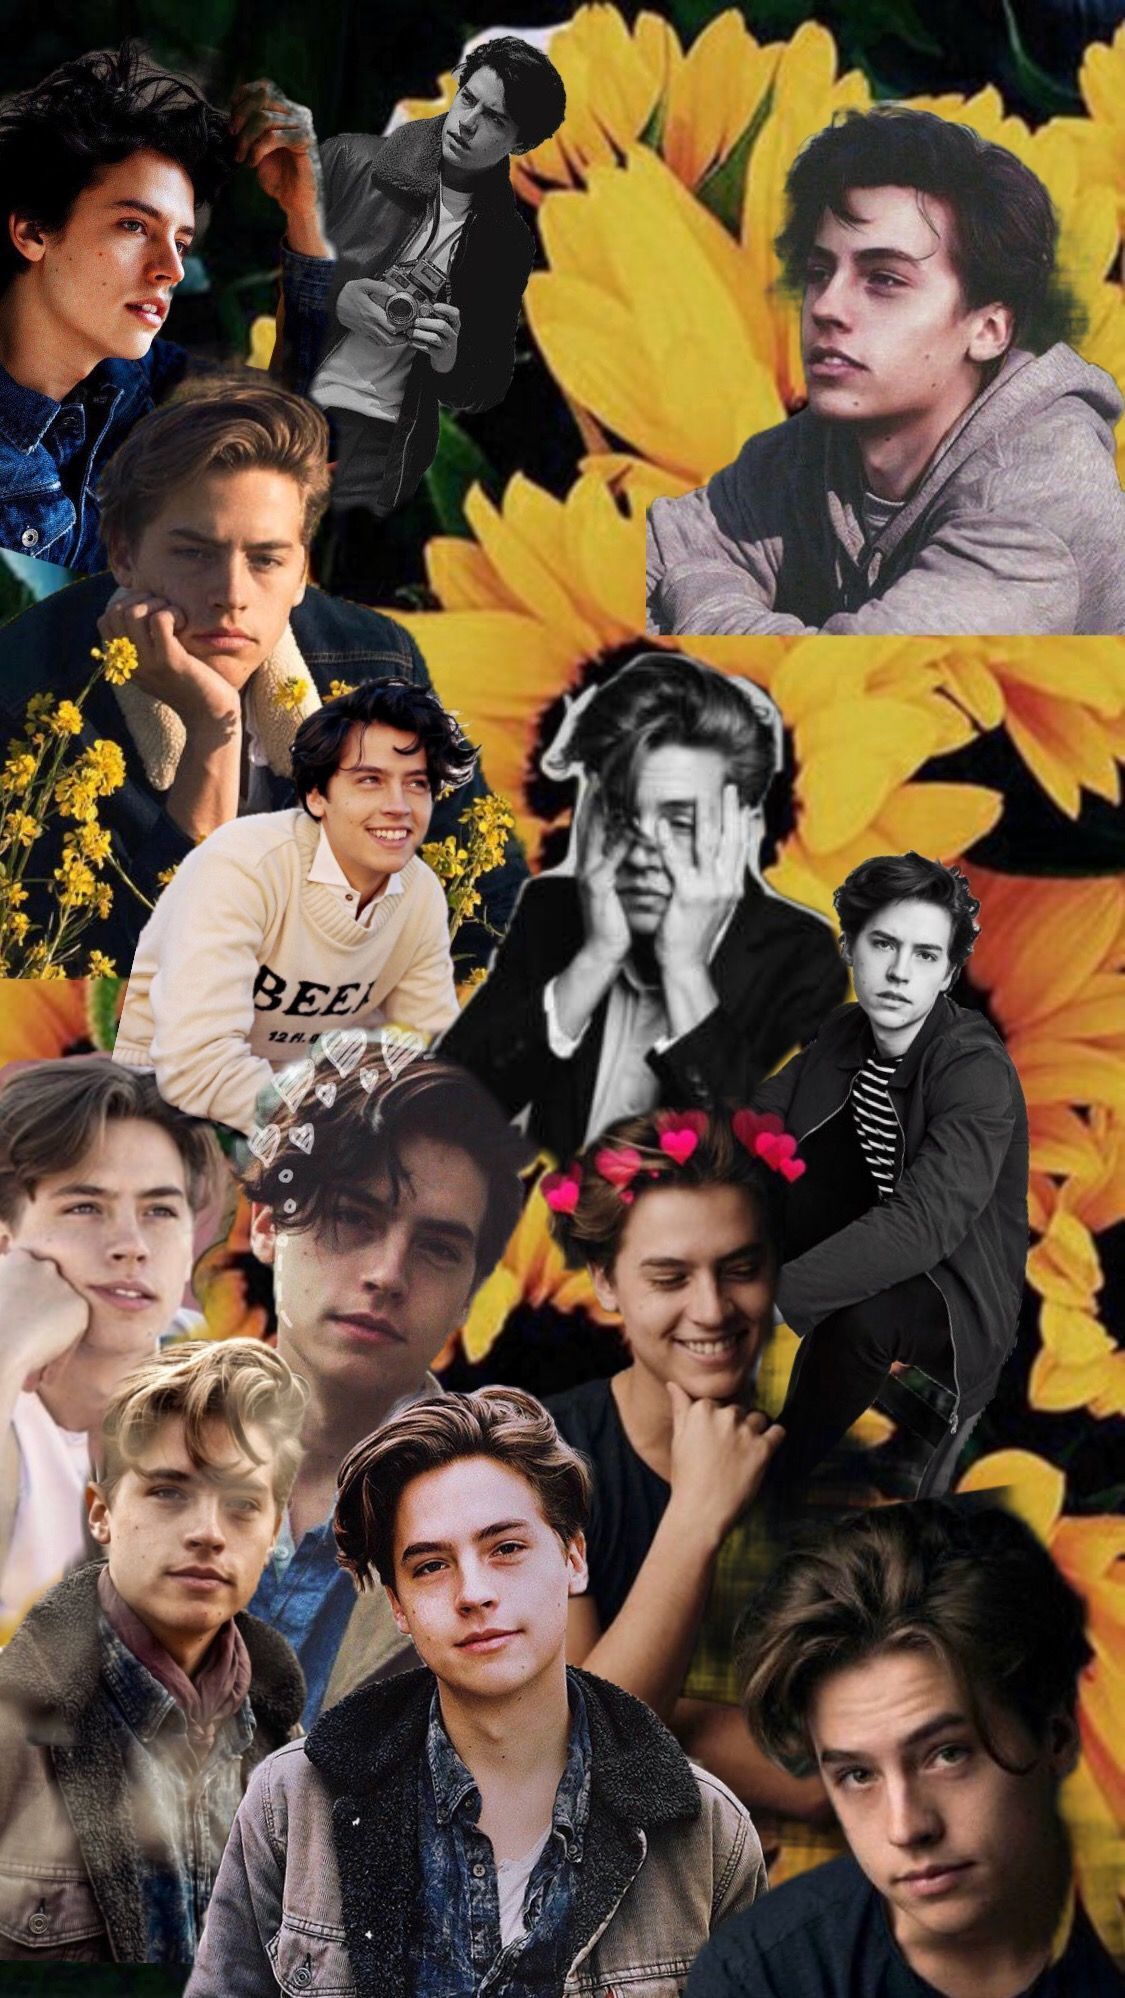 Pantalla de cole sprouse #coleanddylansprouse. Dylan y cole